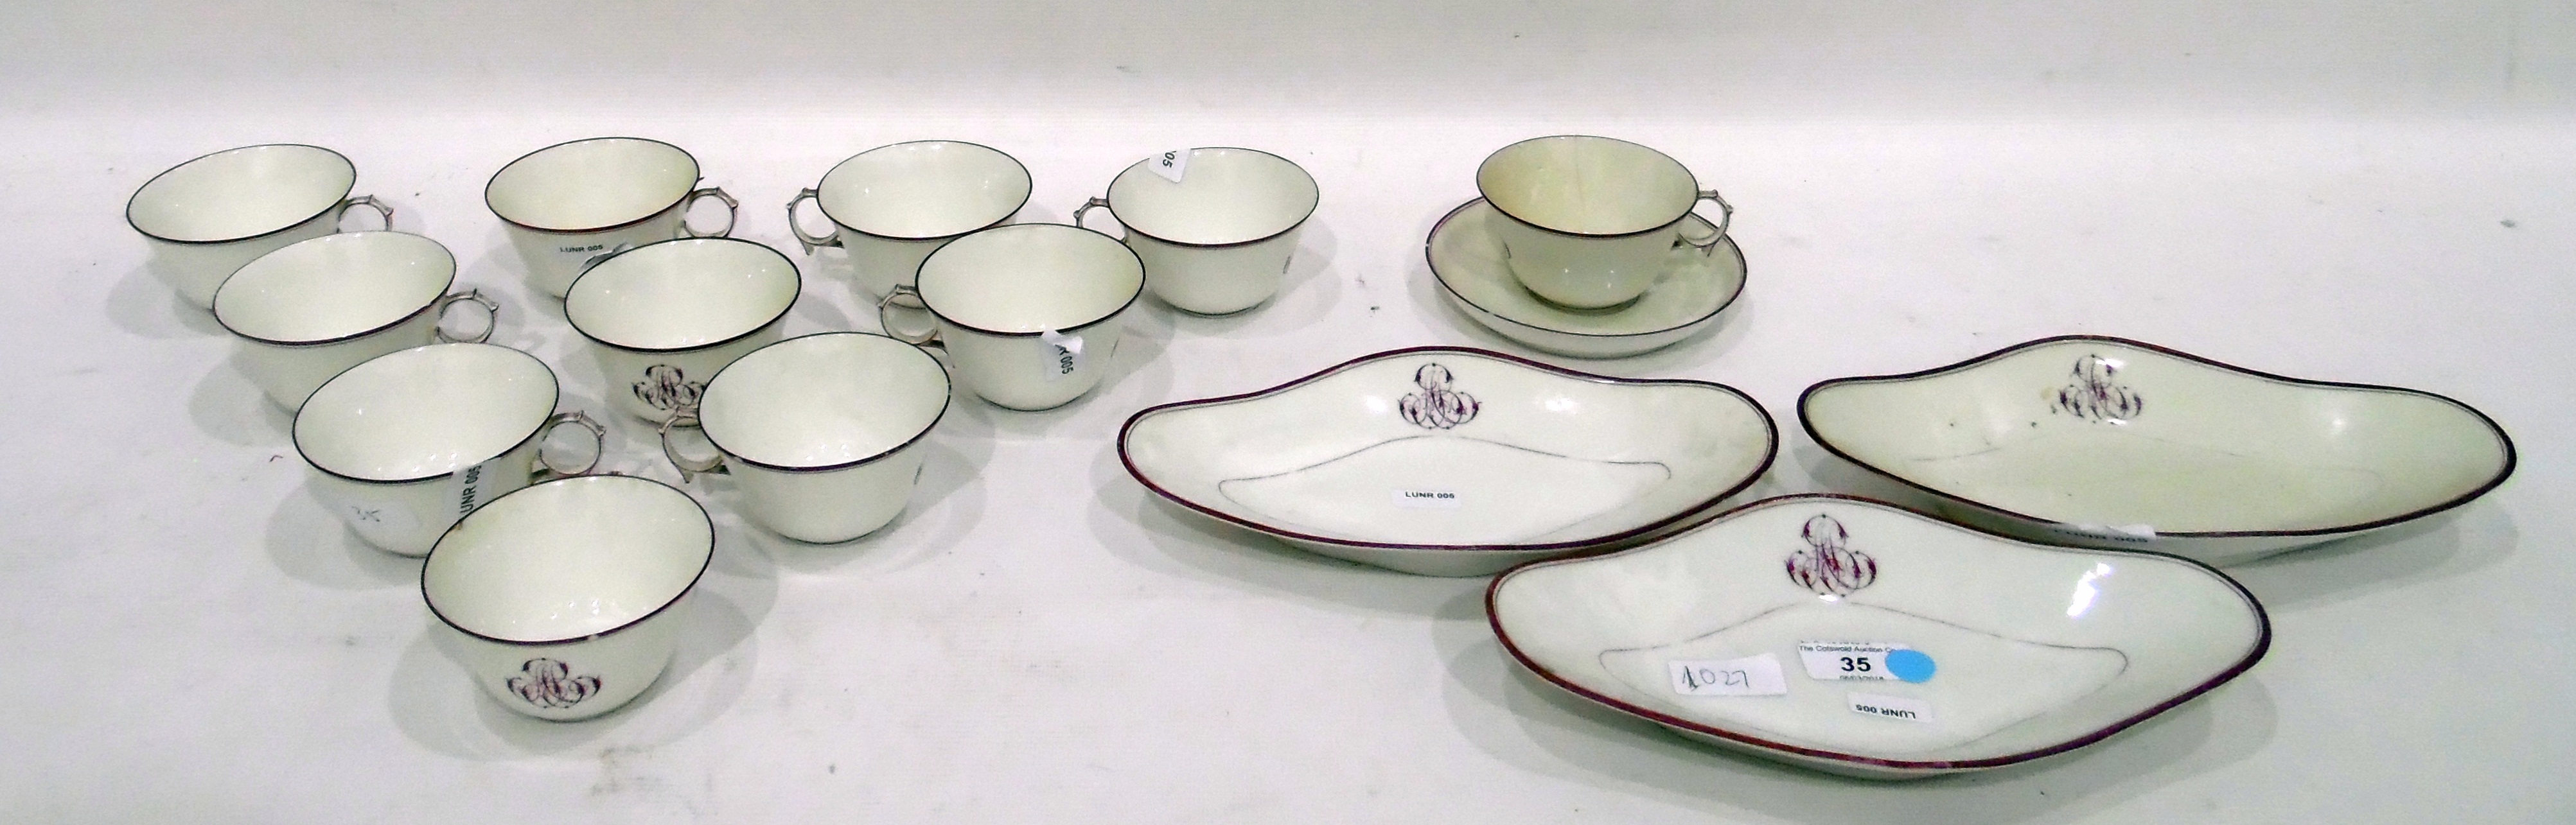 Quantity of monogrammed china to include a set of 11 fine porcelain teacups, - Image 2 of 2